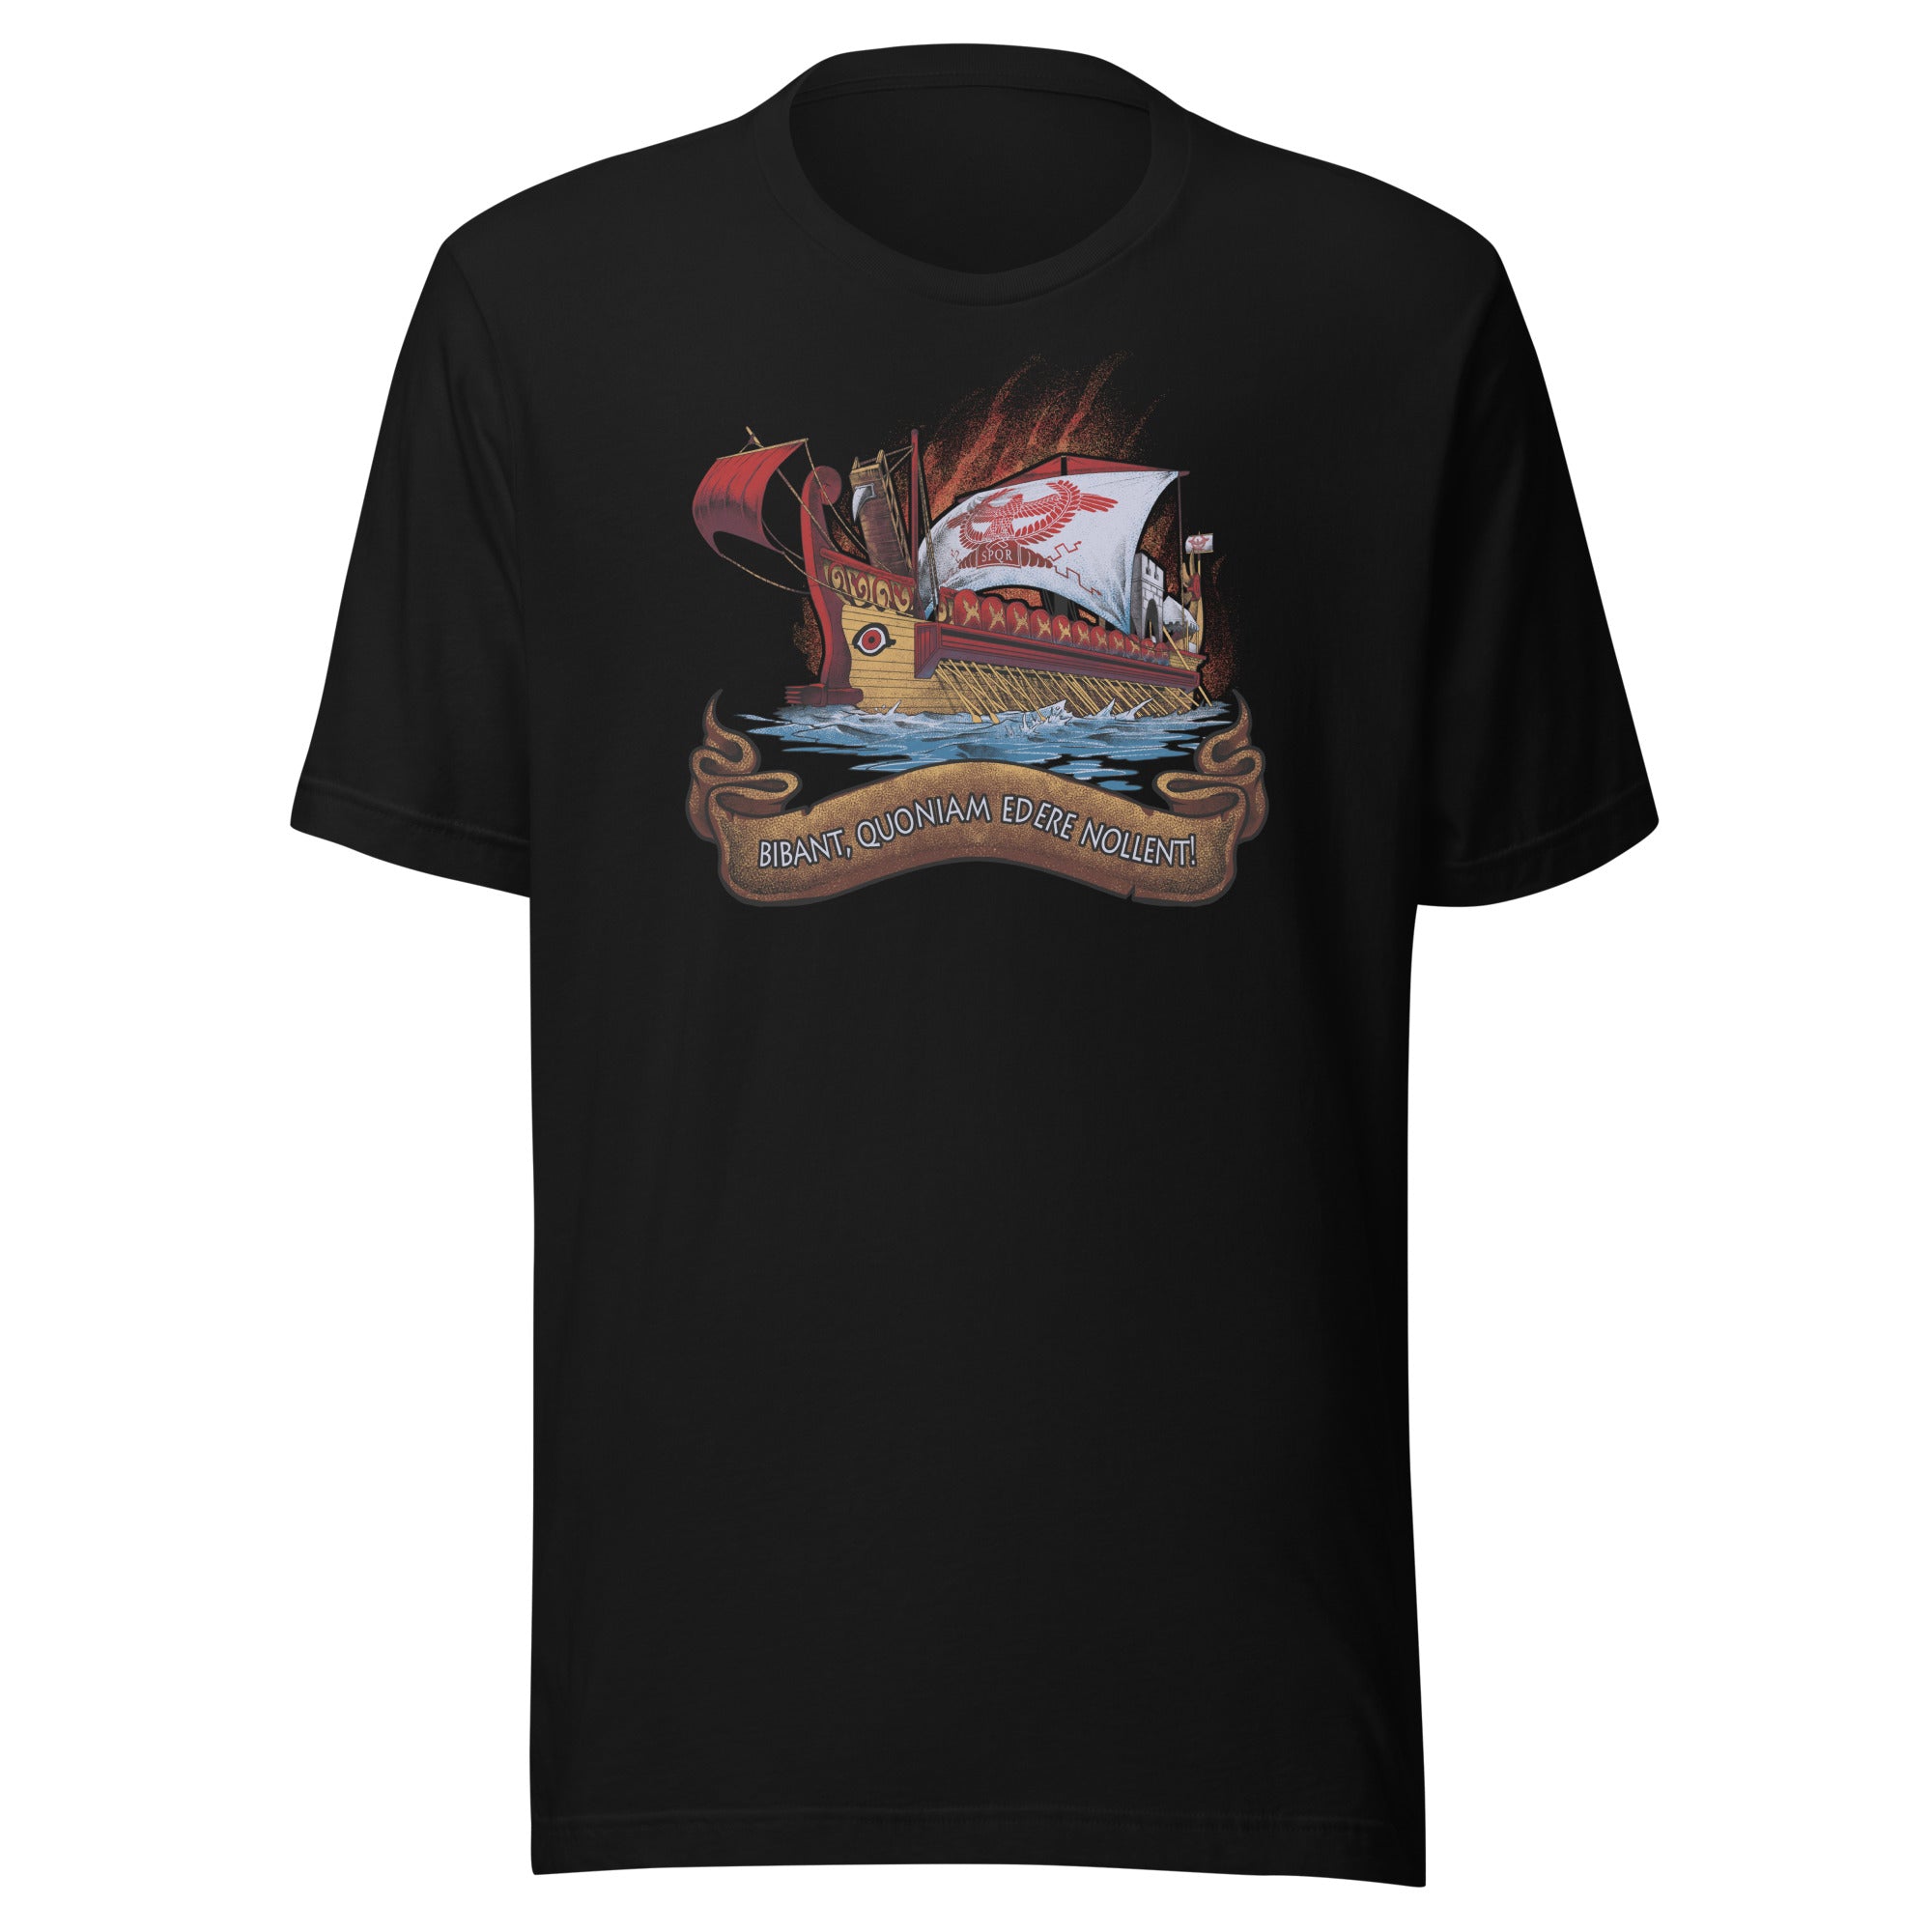 Sacred chickens t-shirt